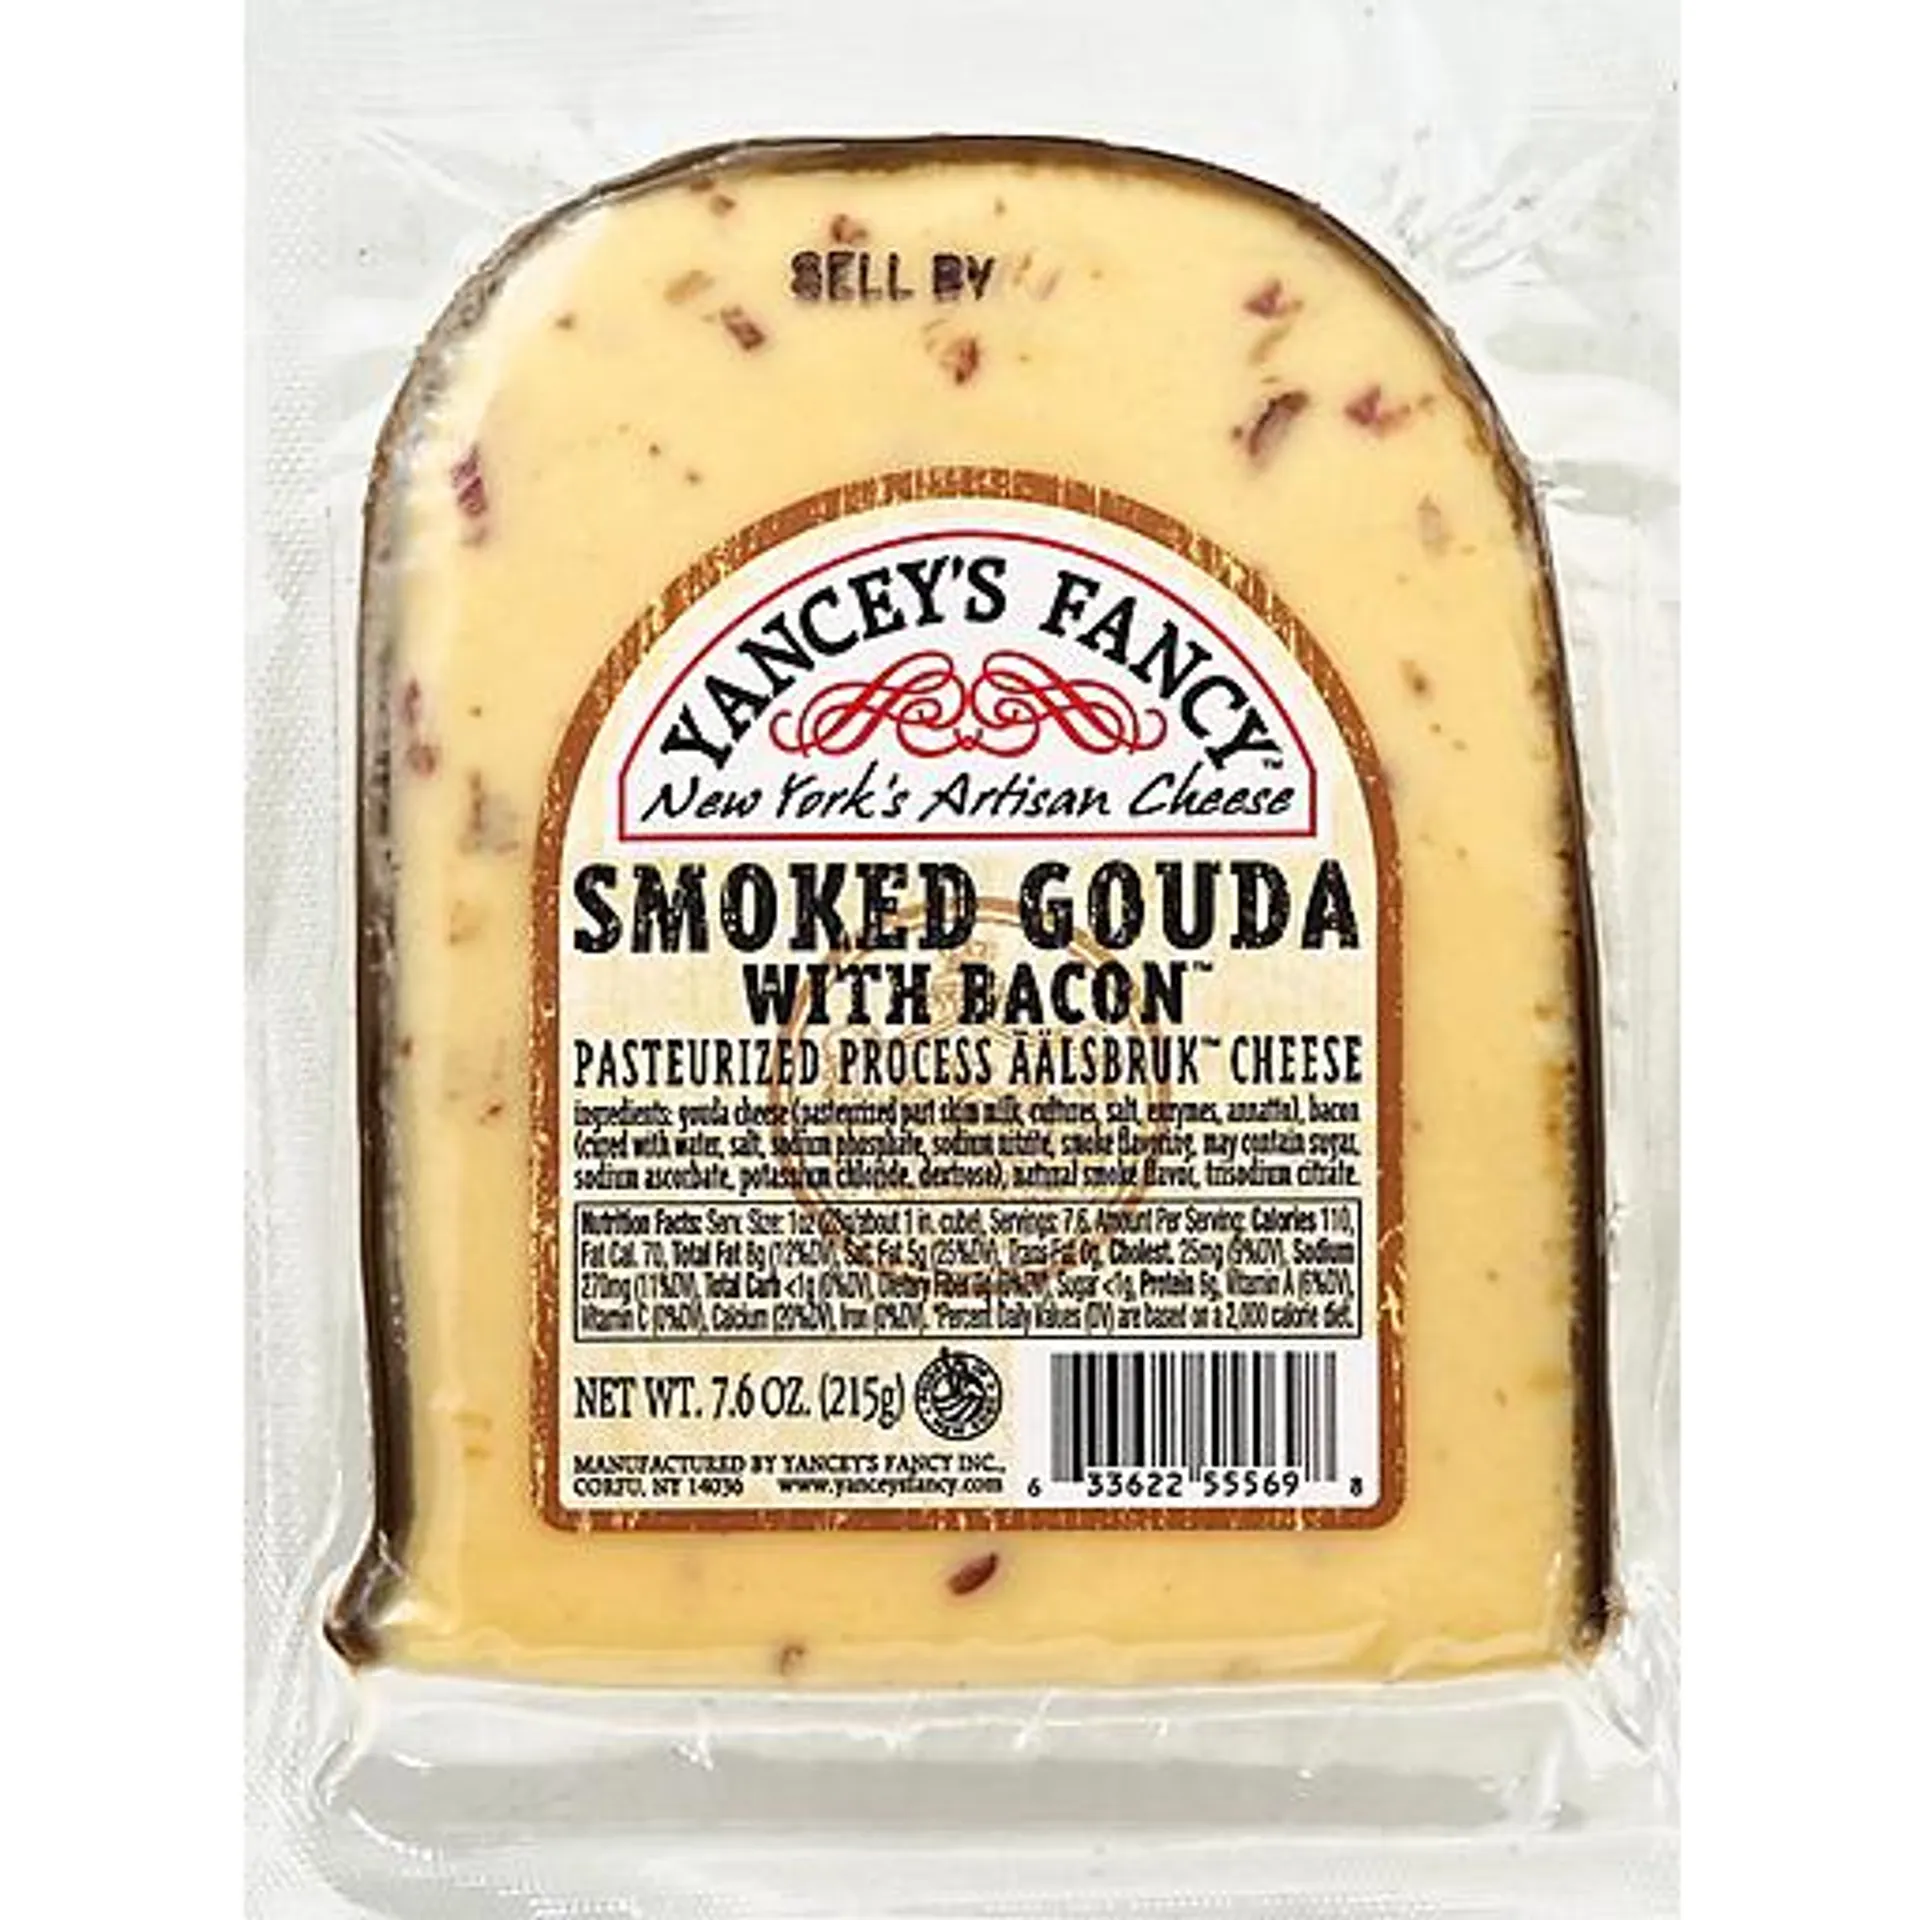 Yancey's Fancy Cheese, Pasteurized Process Aalsbruk, Smoked Gouda with Bacon 7.6 oz